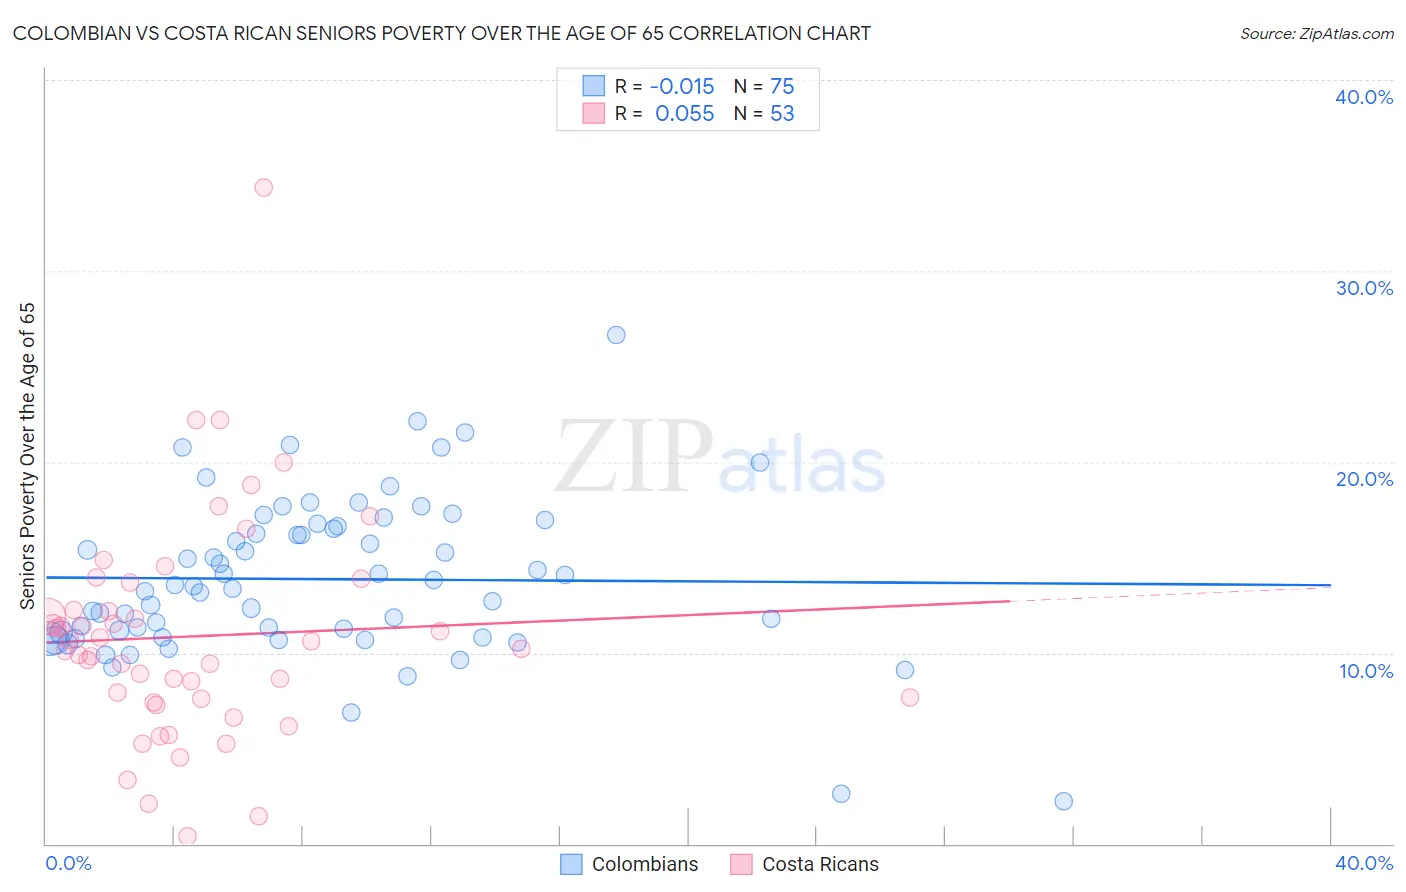 Colombian vs Costa Rican Seniors Poverty Over the Age of 65